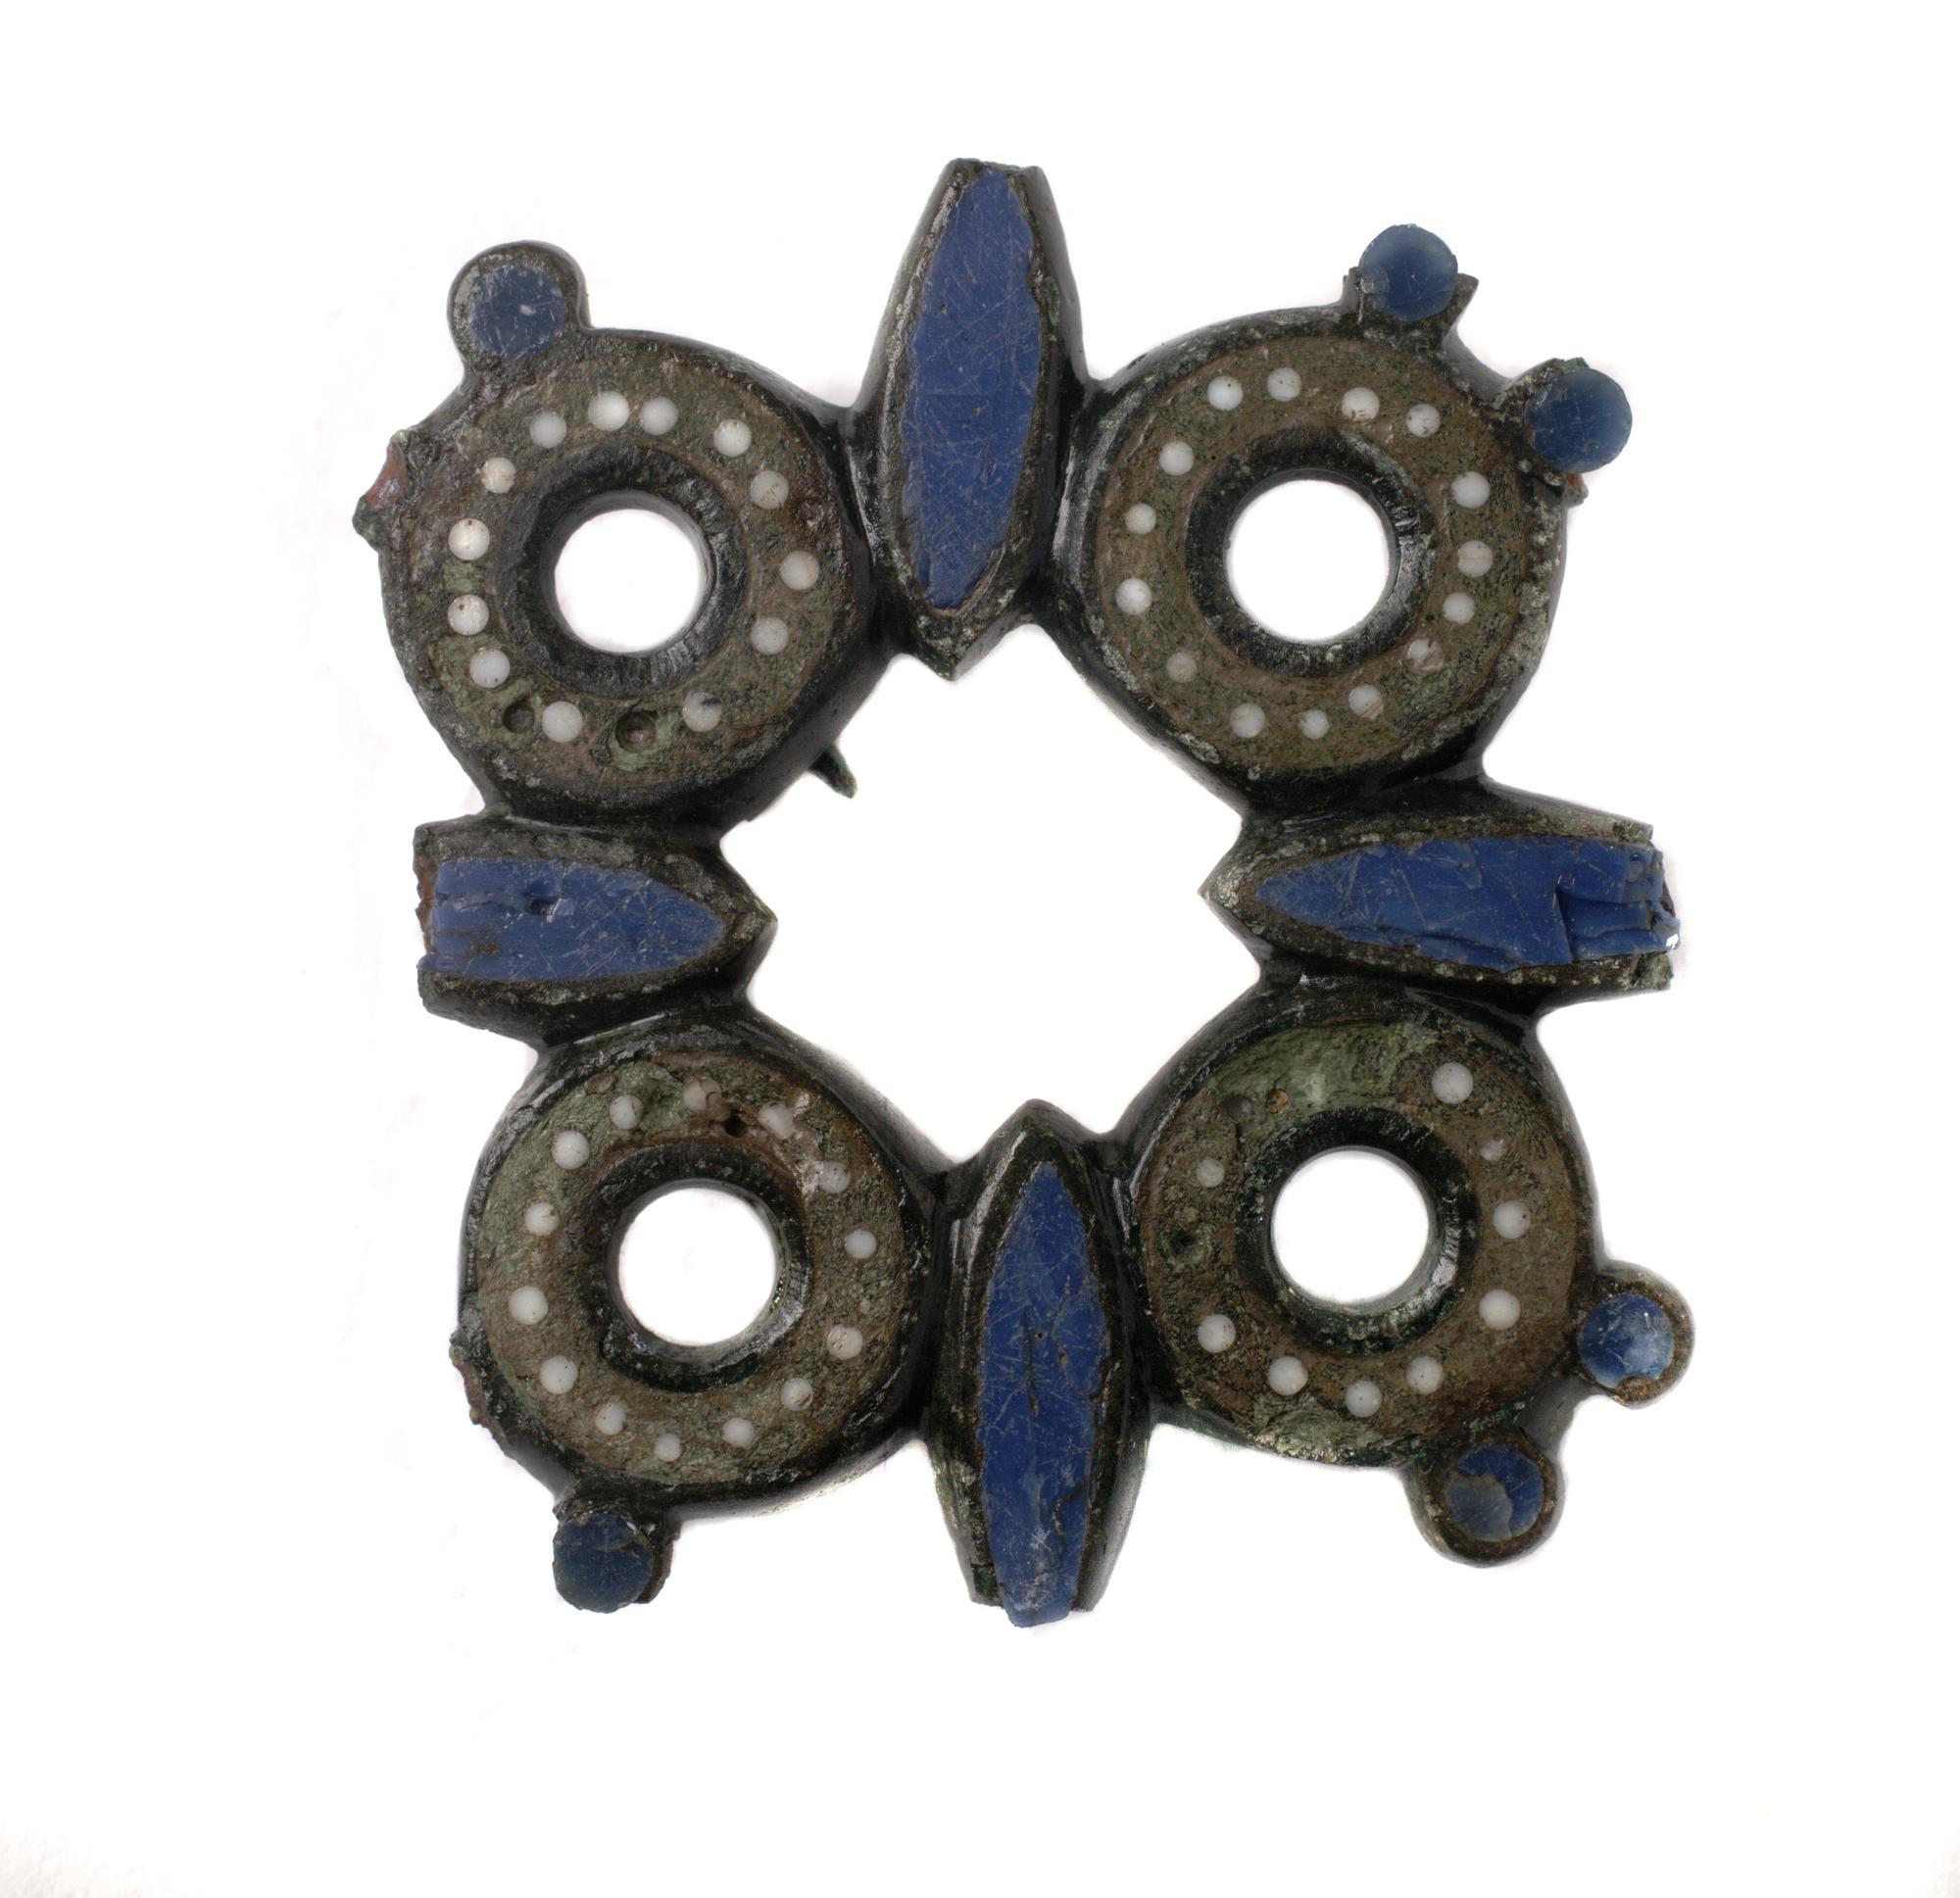 Image of Gallo-Roman enamelled bronze brooch from Carlungie II, Angus, 100 - 200 AD © National Museums Scotland